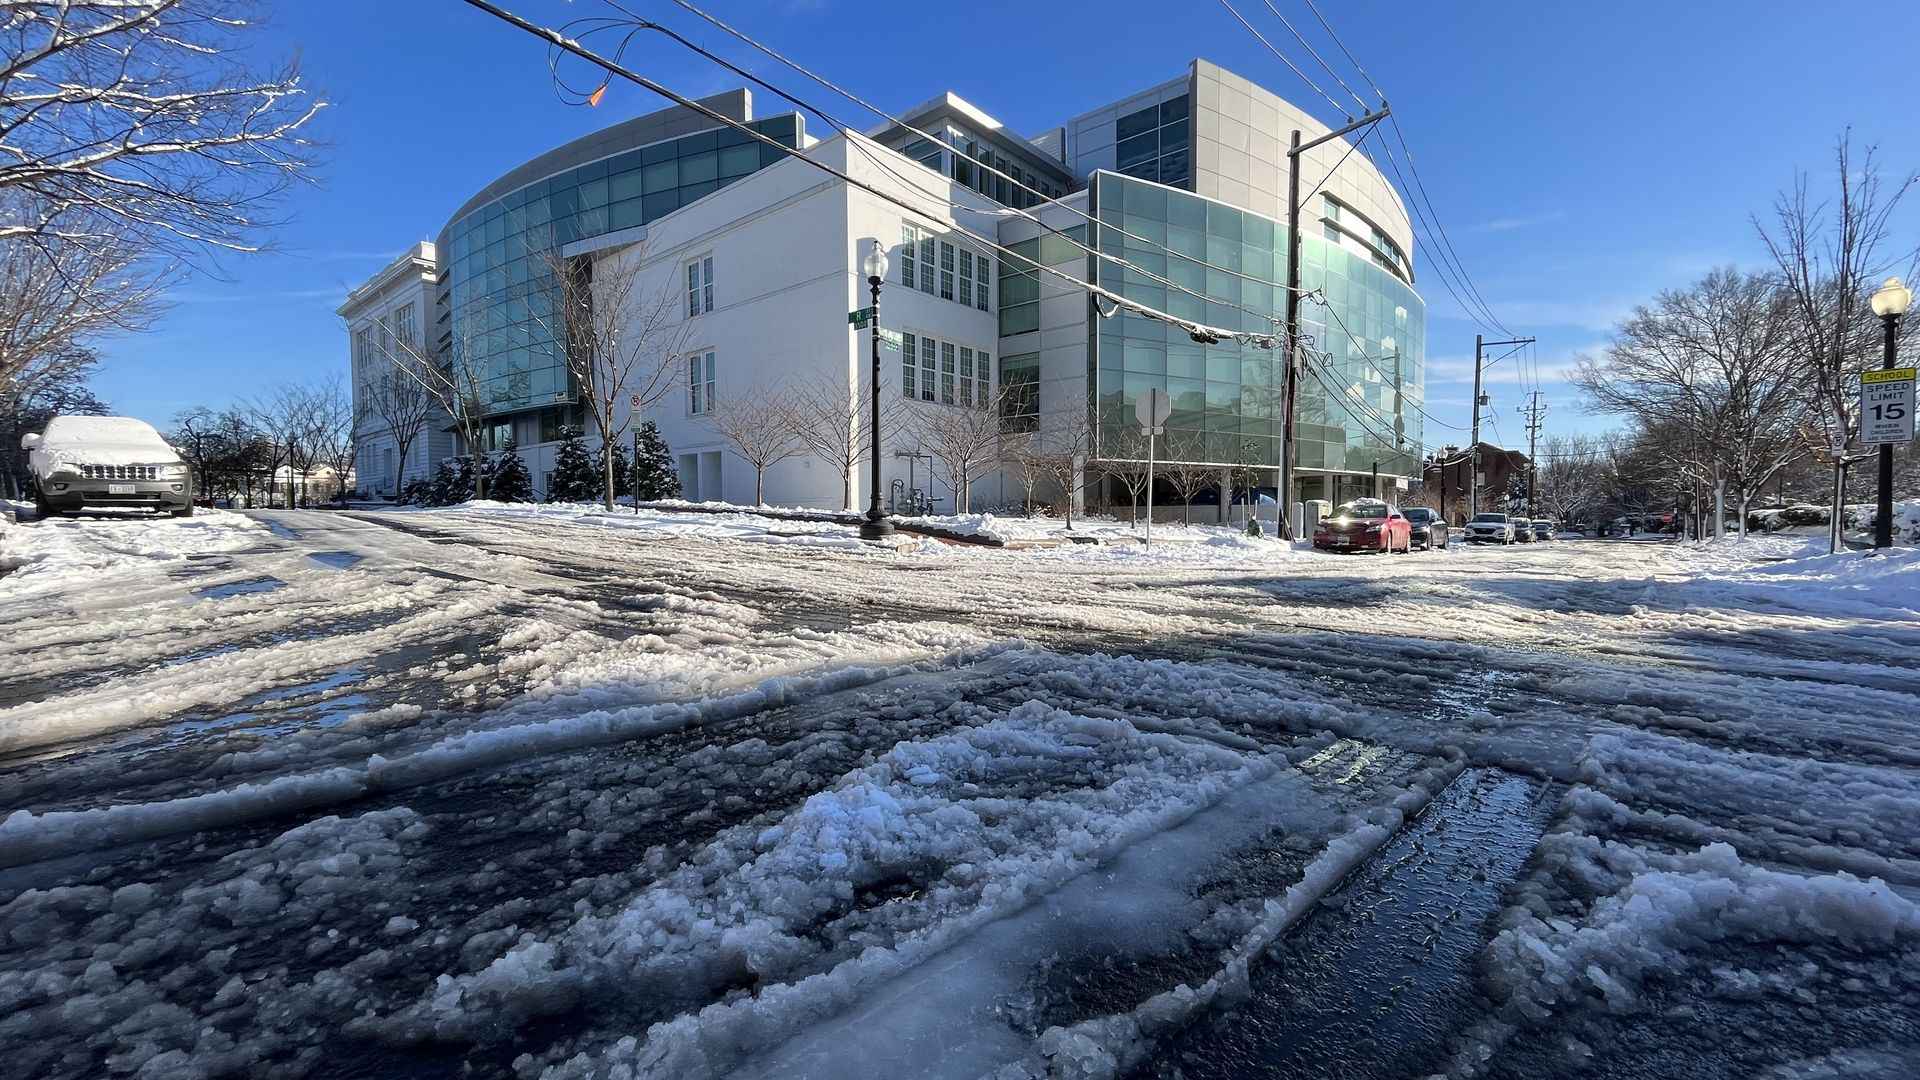 A snow-covered intersection with Duke Ellington School of the Arts in the background